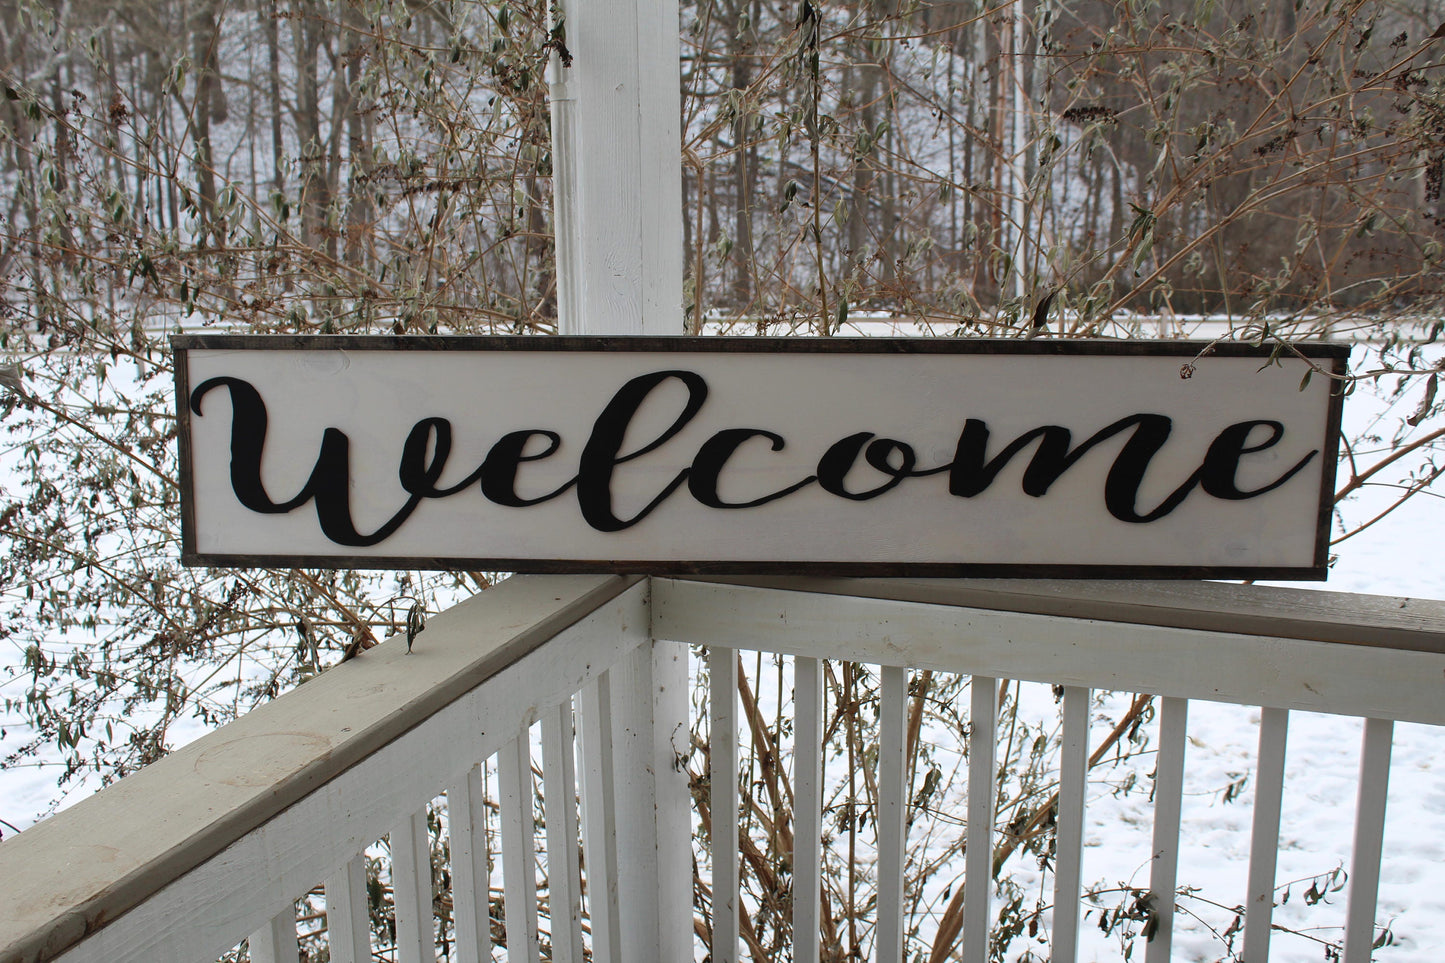 Large rustic welcome sign, front porch deck decor outdoor signs indoor signage great decor shabby chic primitive farmhouse wood farm house